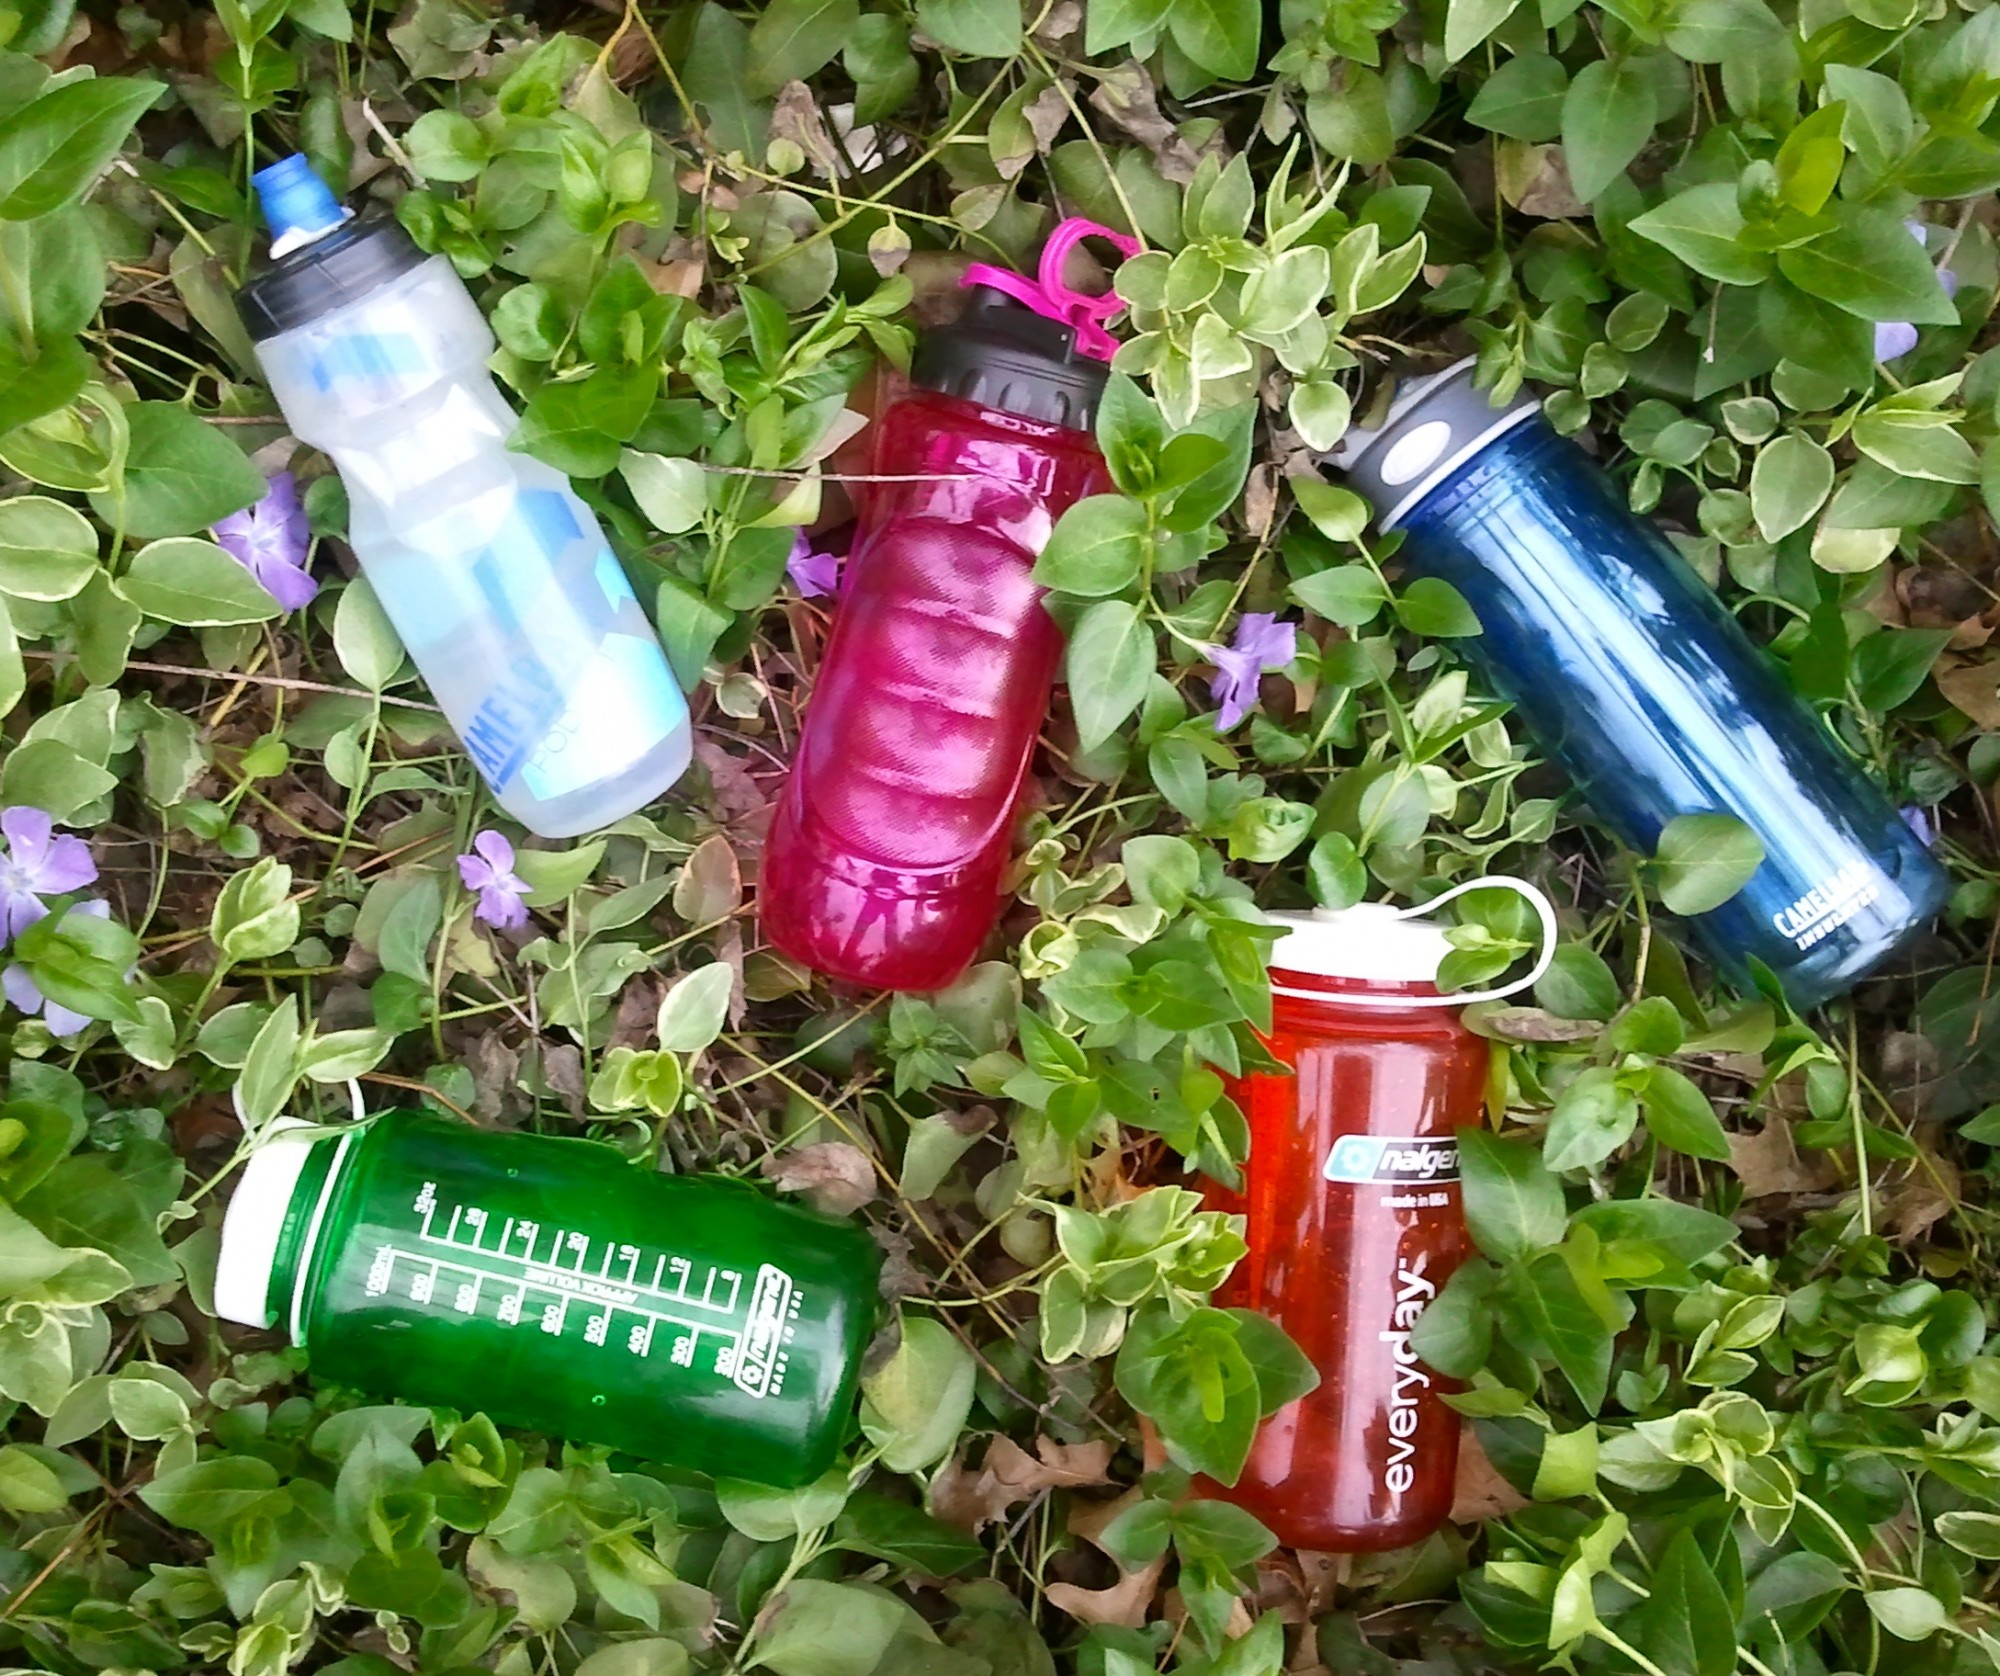 athlete habits: stay hydrated, water bottles on leaves